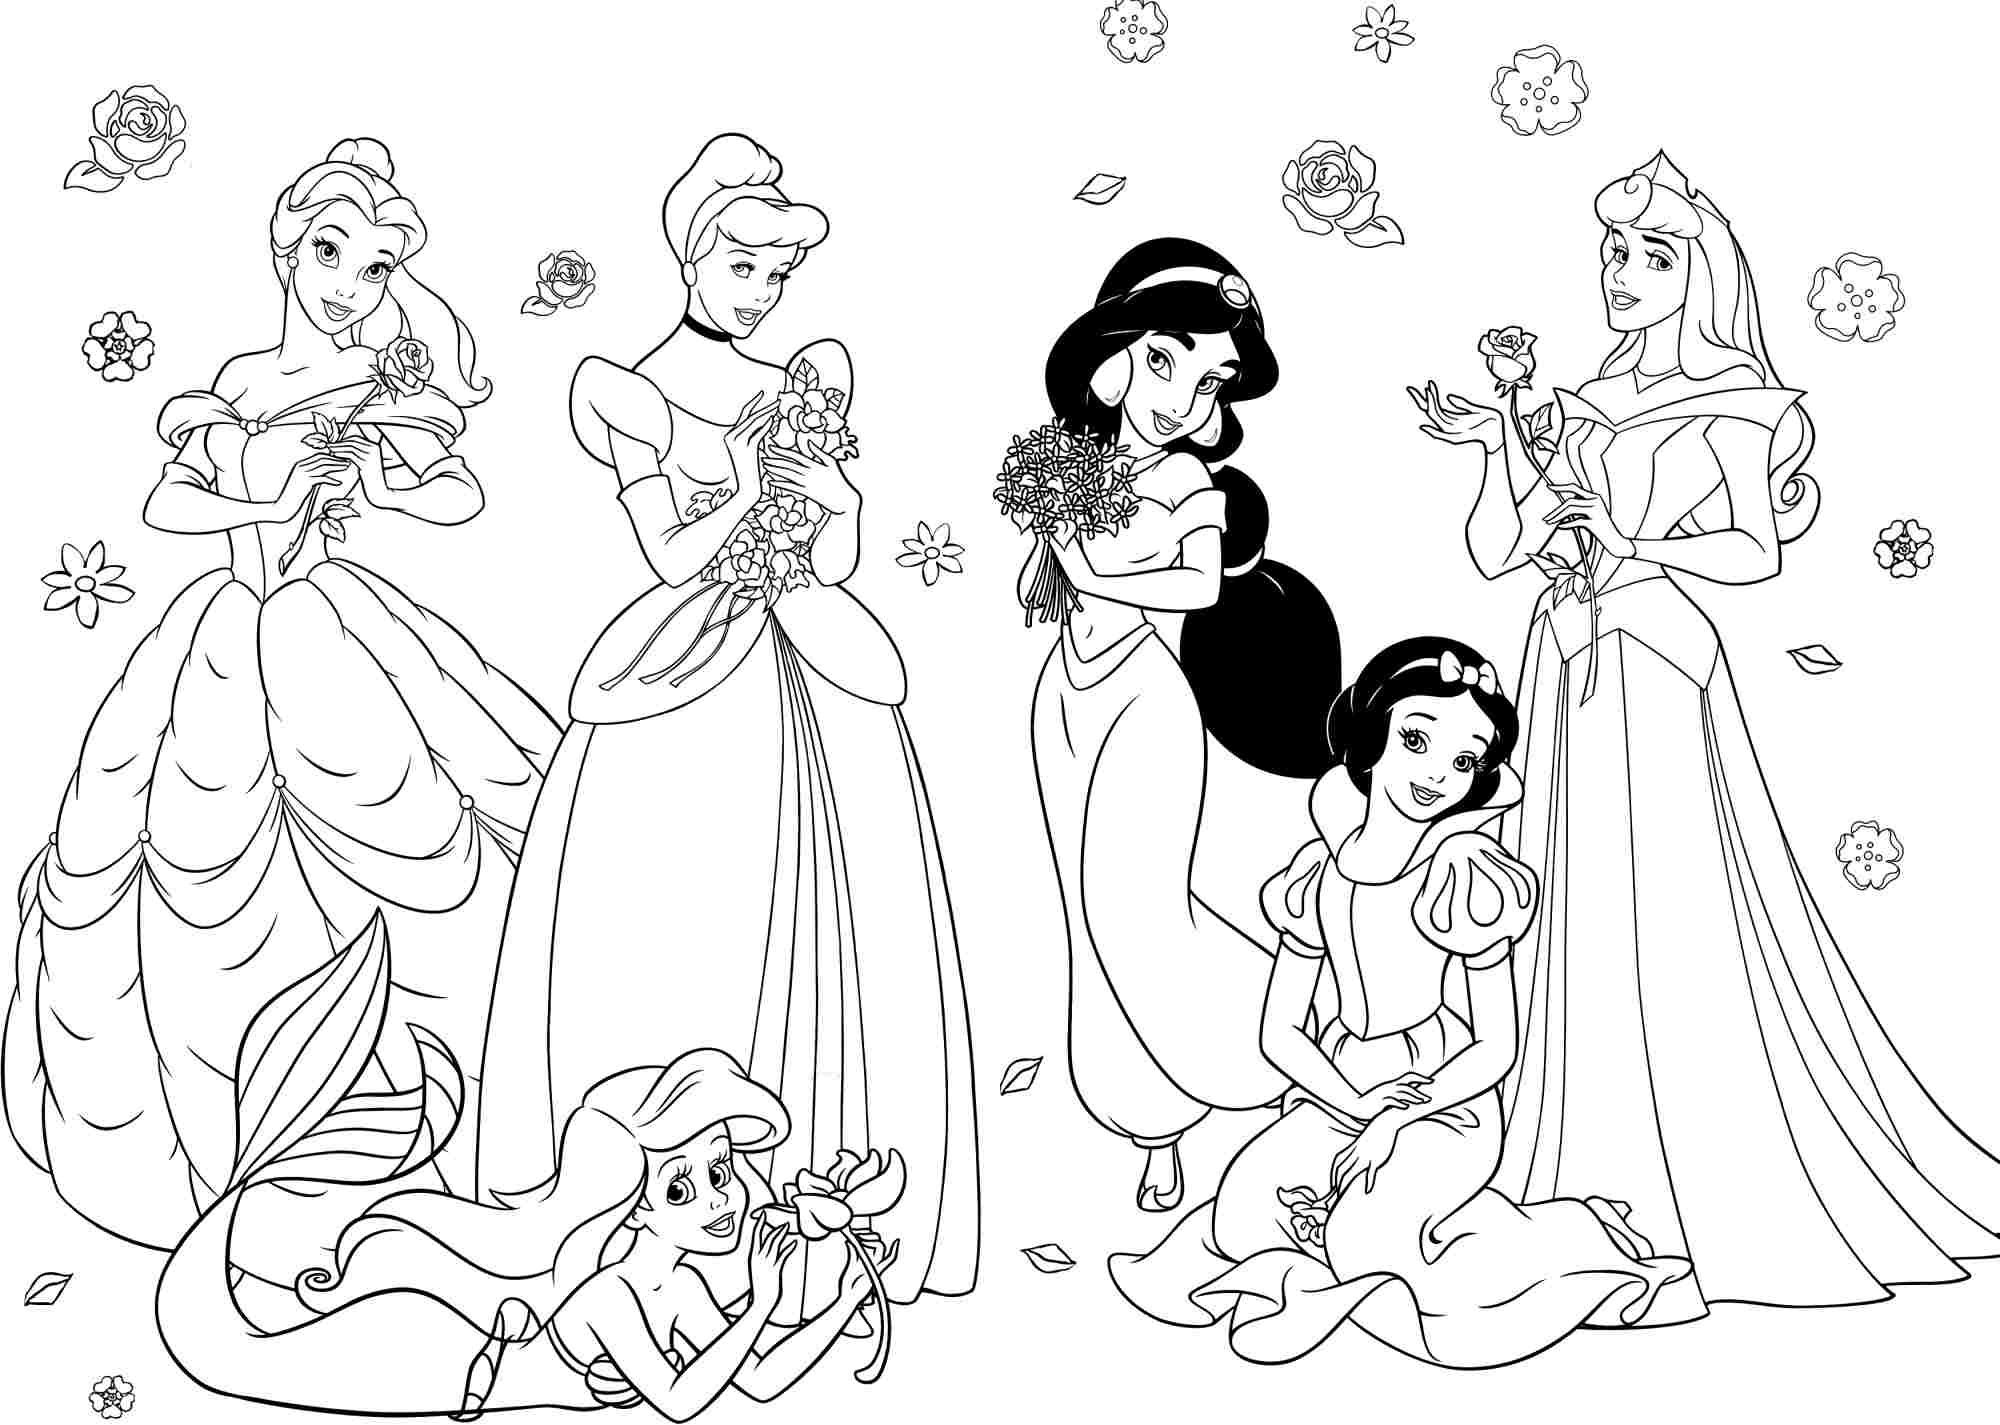 Adorable princess coloring book for girls